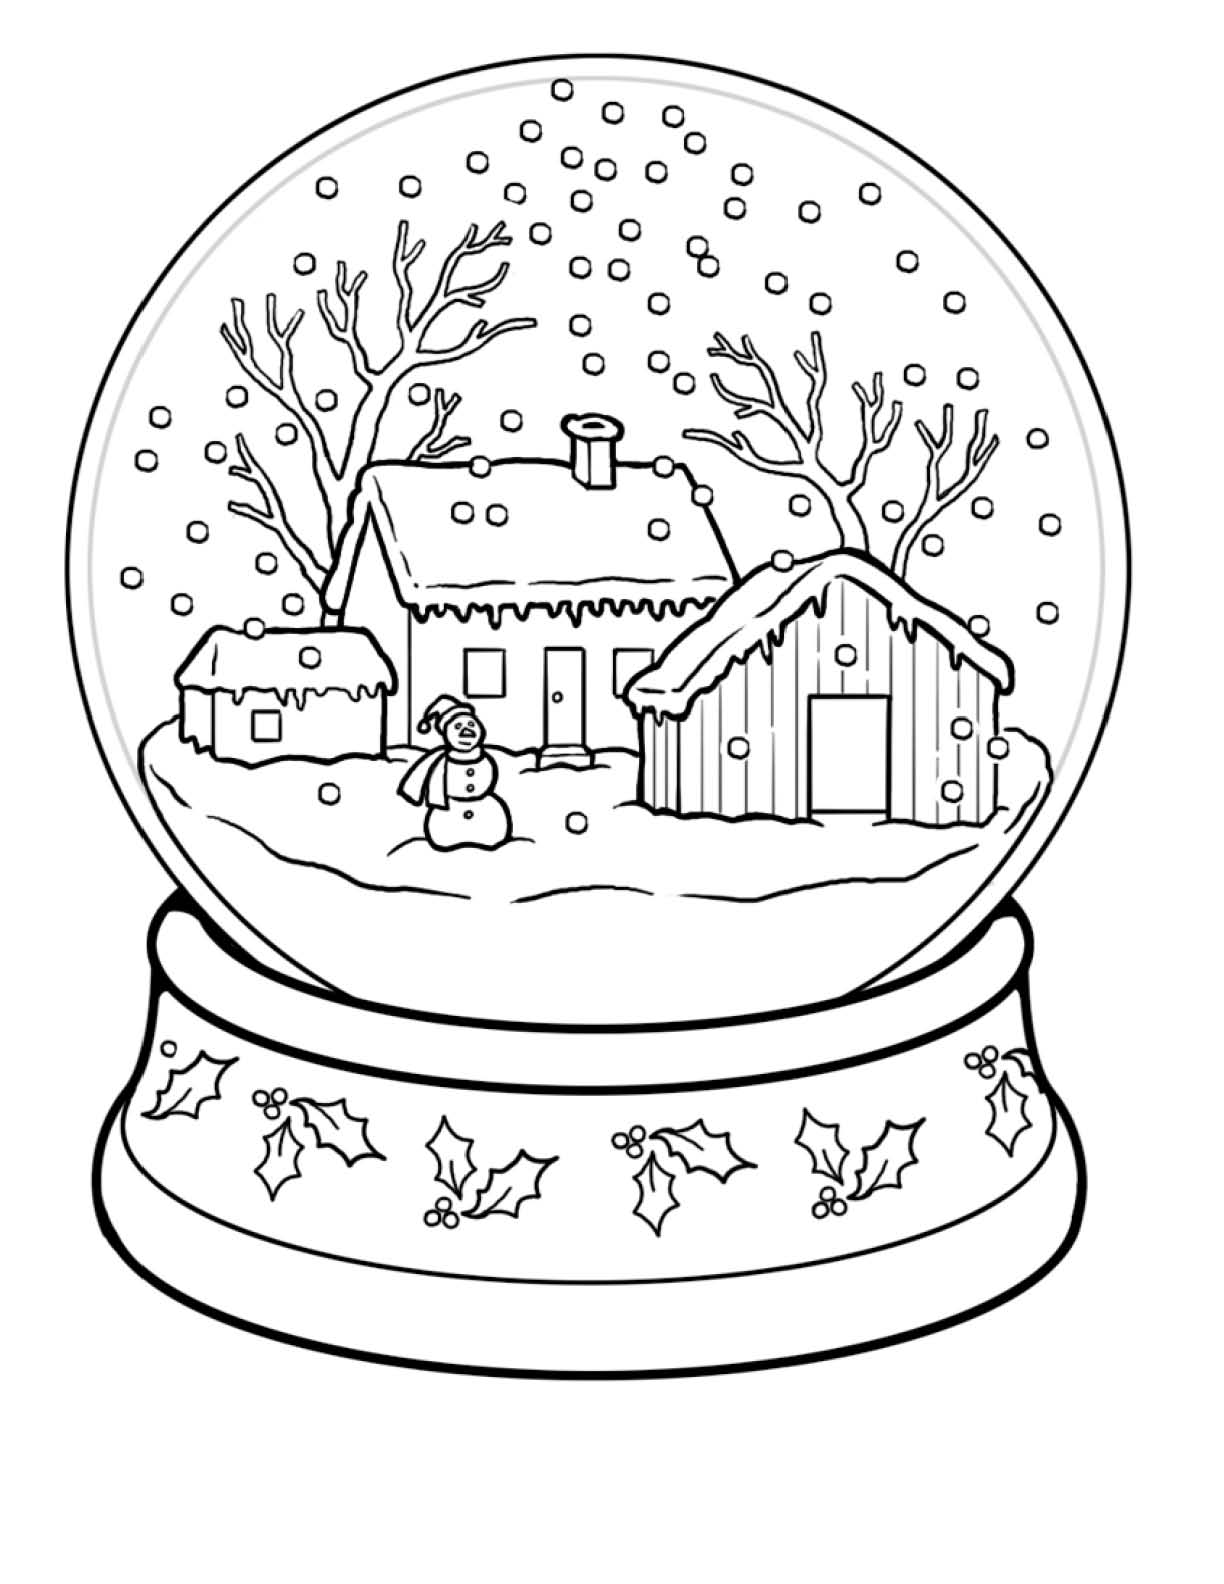 Coloring Pages Winter Scenes | High Quality Coloring Pages